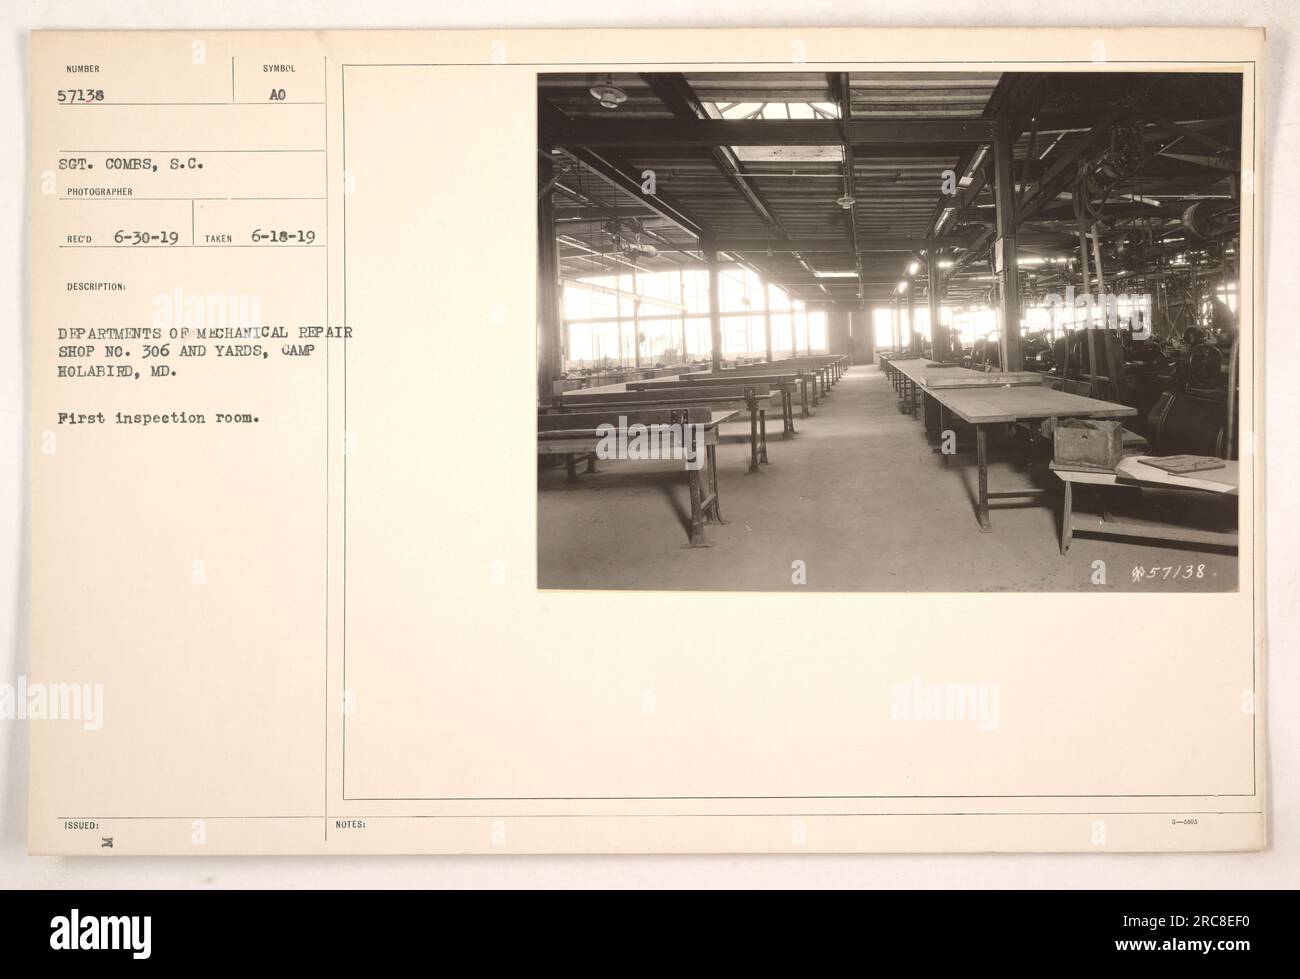 Interior view of the first inspection room at Departments of Mechanical Repair Shop No. 306 and Yards, located at Camp Holabird in Maryland. The photograph was taken on June 18, 1919, by Sergeant Combs, a military photographer. It is part of the records marked with the symbol 'AO Departments OP Mechanical Repair Shop No. 306 and Yards.' Stock Photo